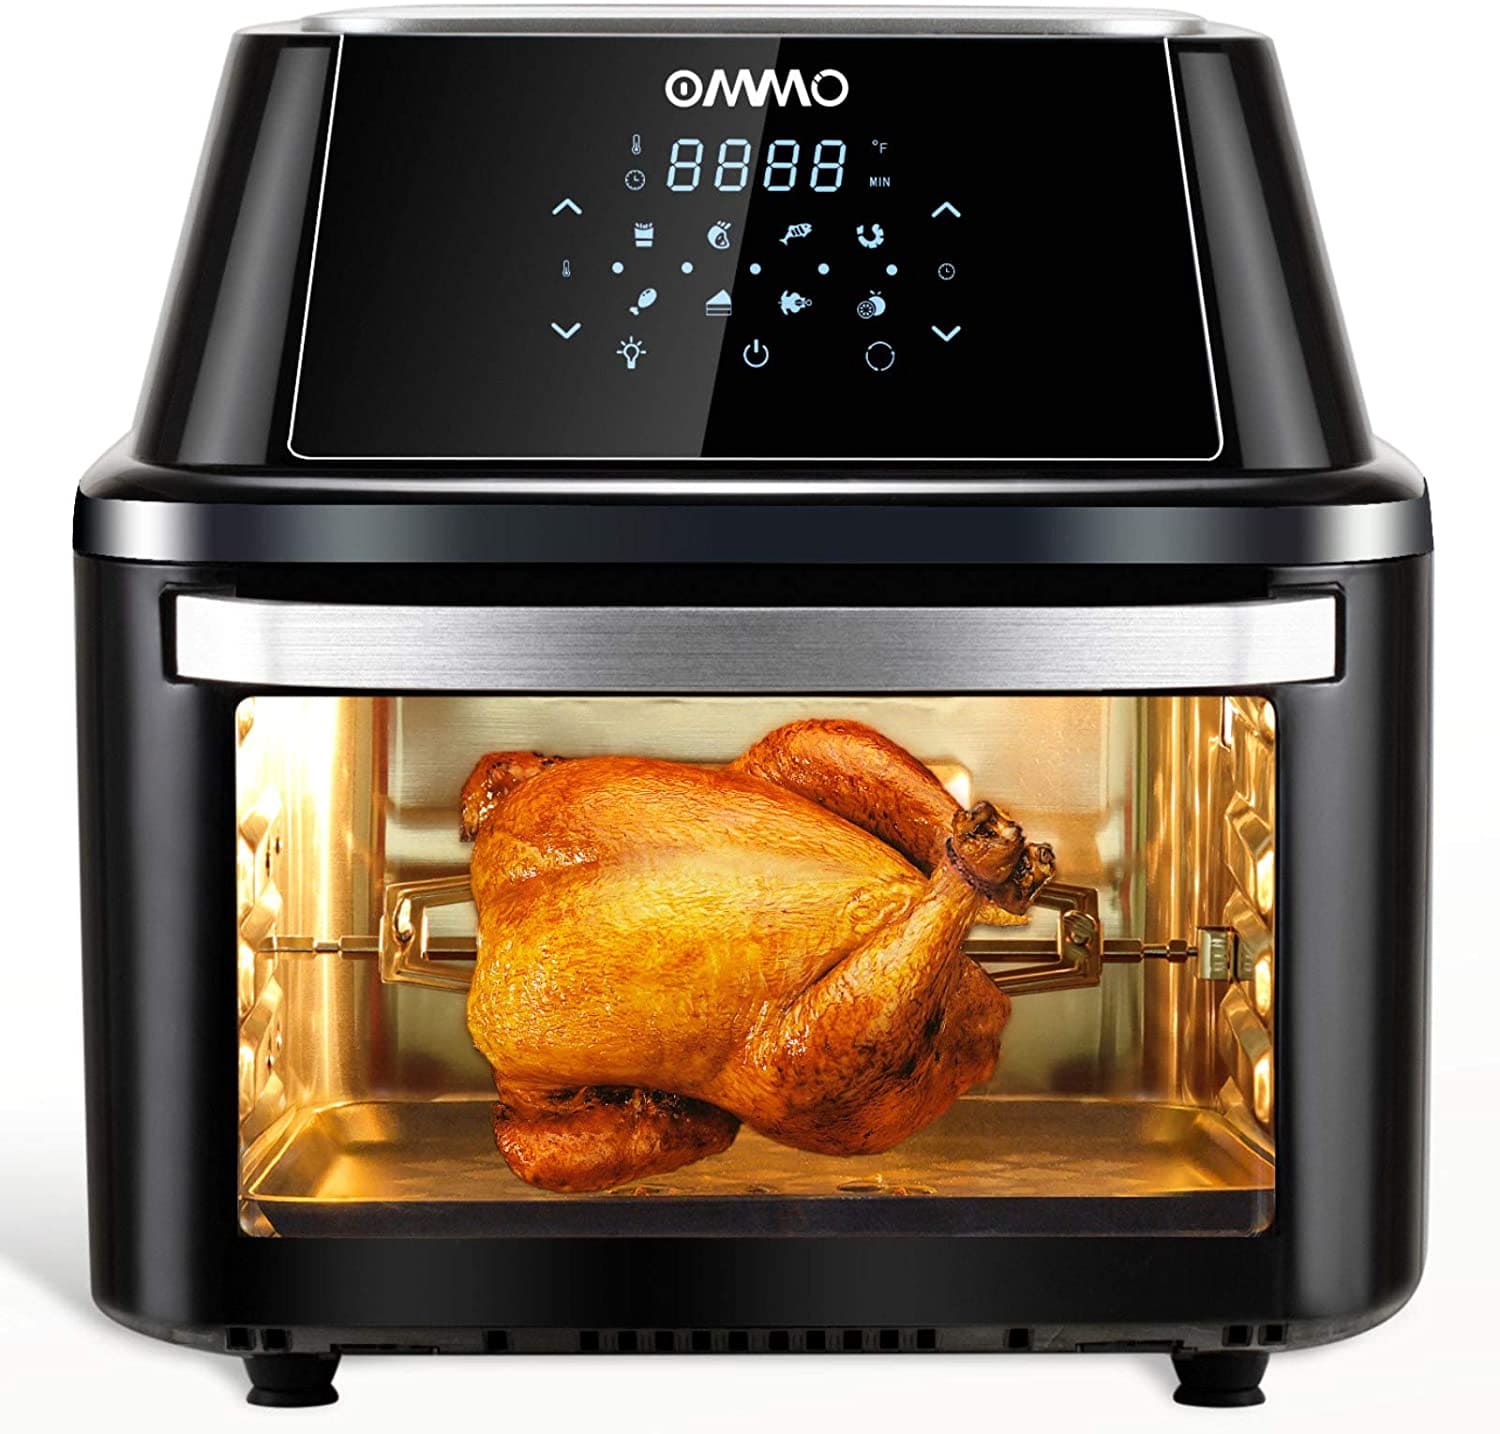 OMMO Air Fryer Oven, 17 Quarts 1800W Large Air Fryer Toaster Oven, 8 Presets